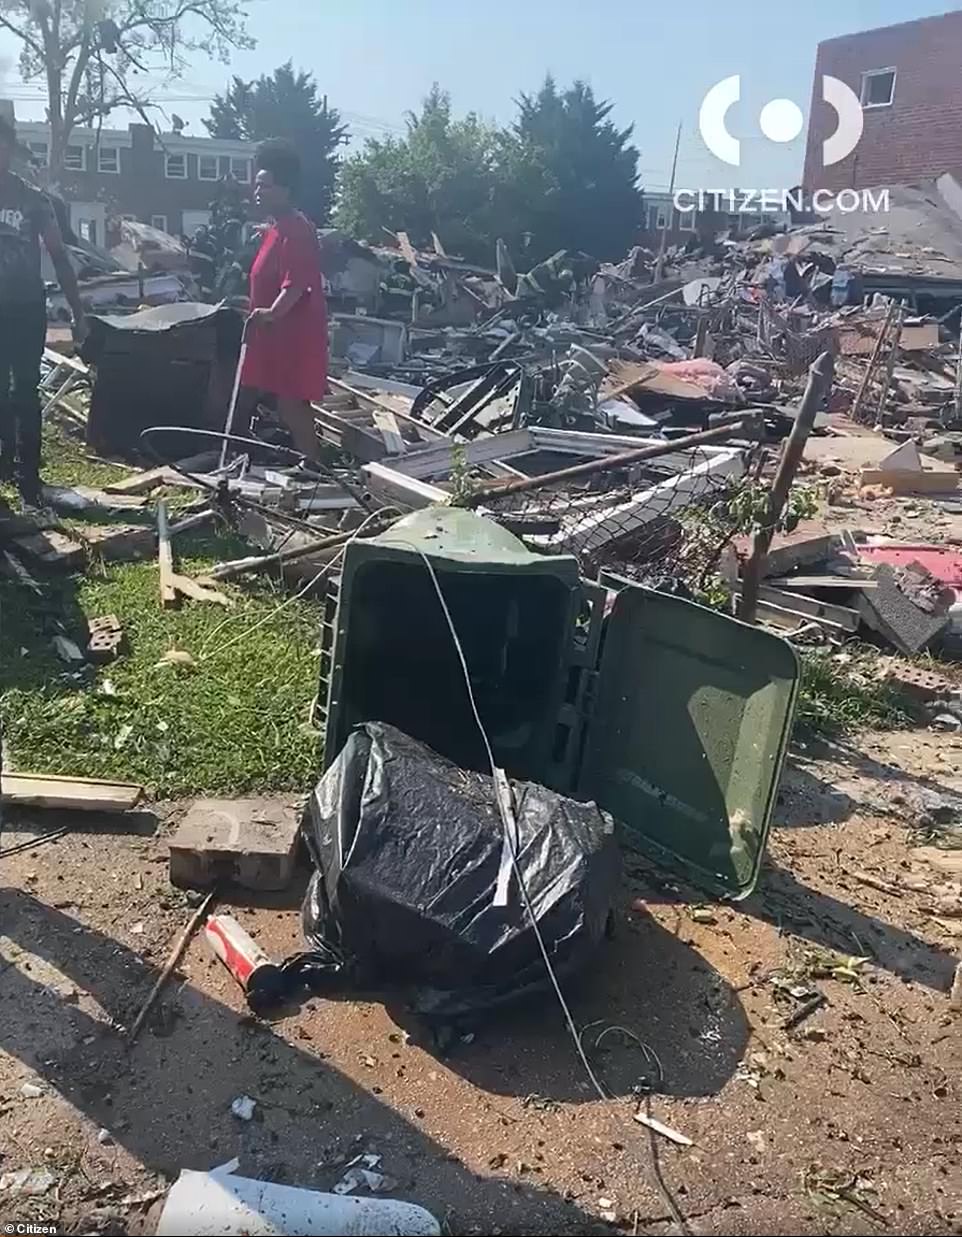 Five people, including children, are trapped inside house in Baltimore after ‘major explosion’